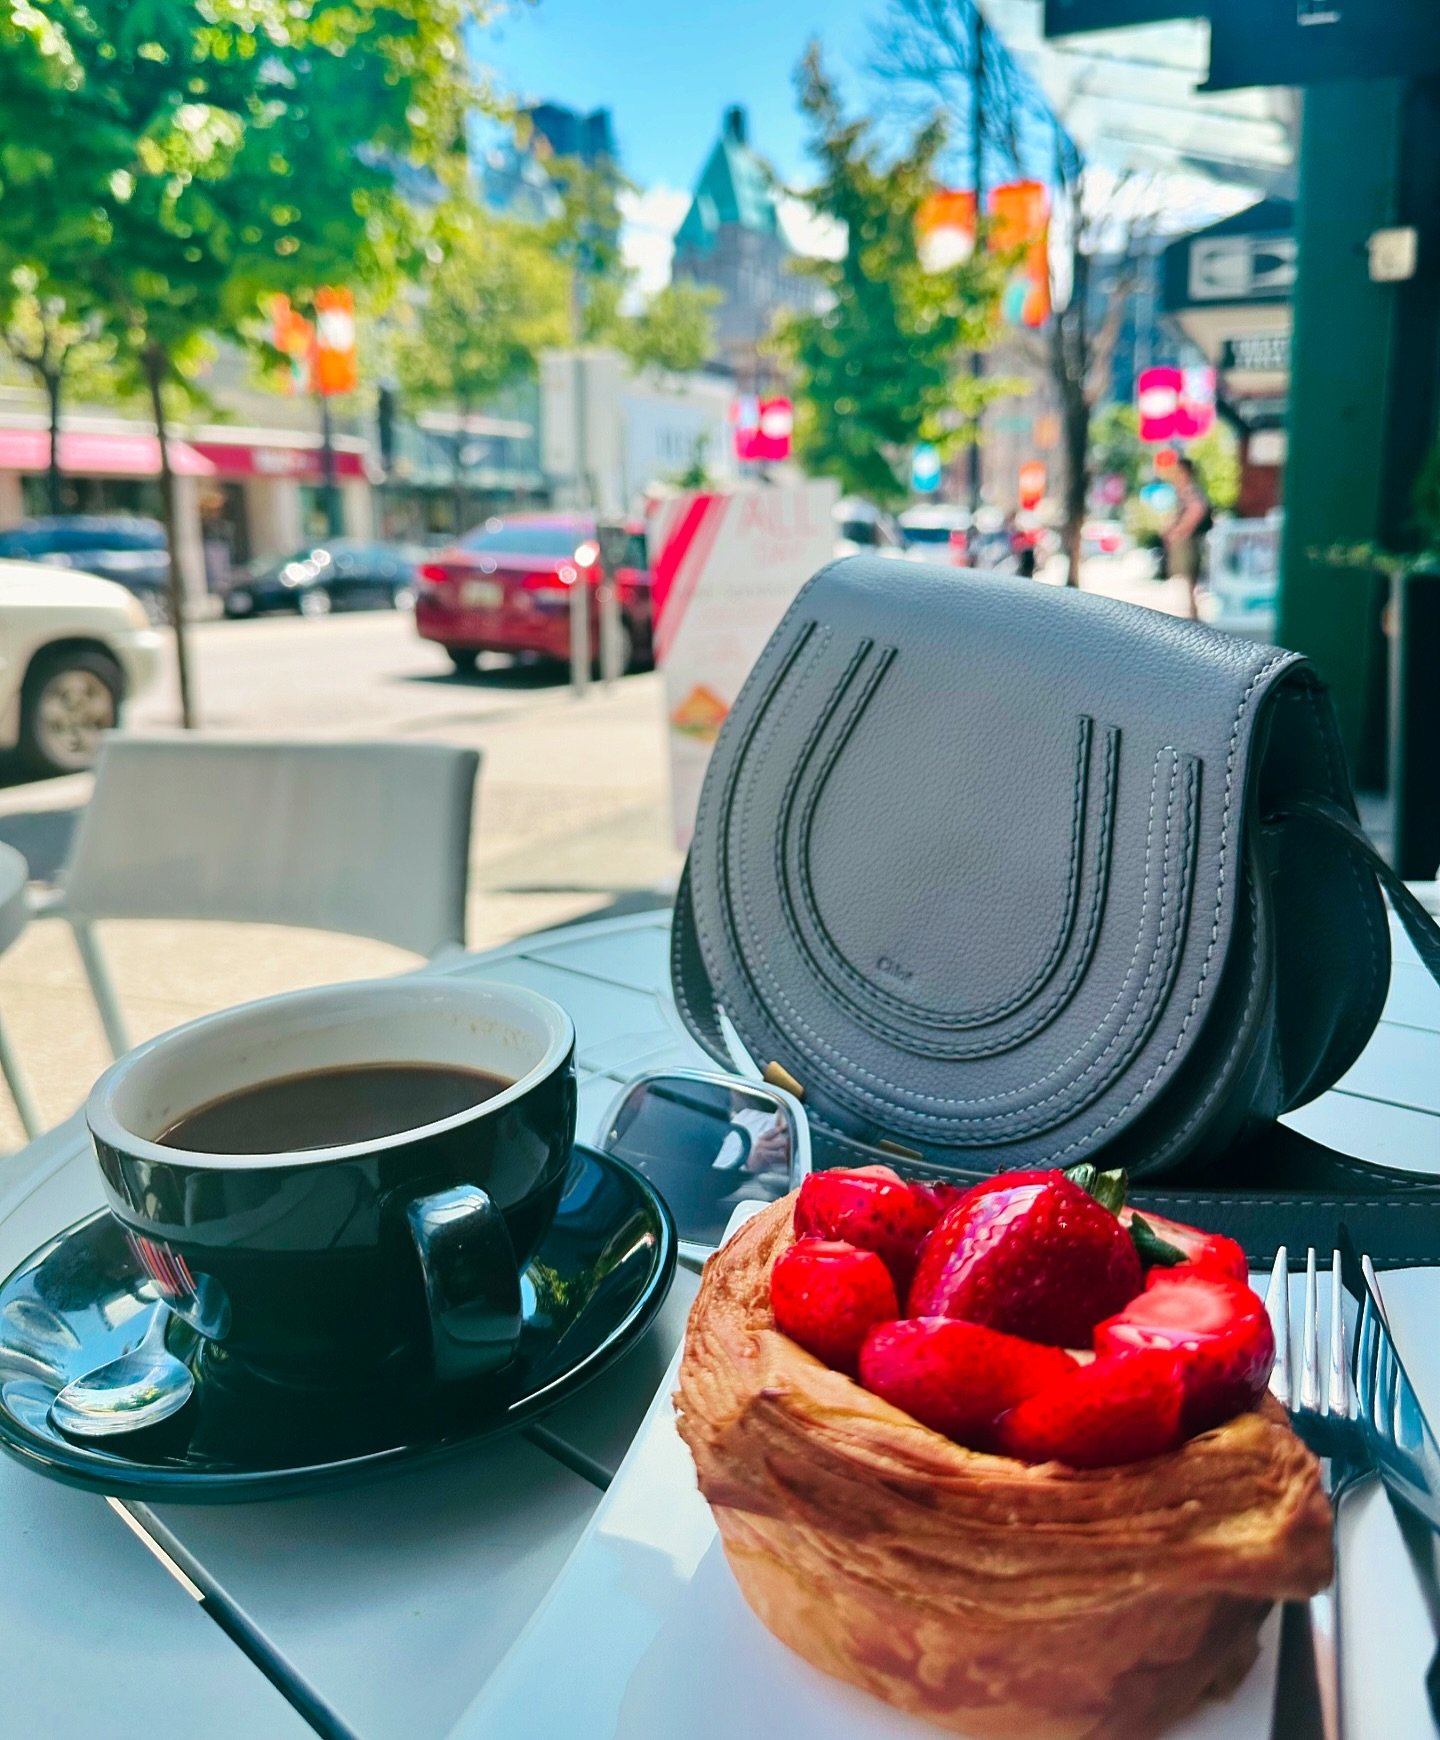 Sometimes when you squint, Vancouver can feel like Paris in the springtime 🍓☕️🌿Enjoying being a flaneur in my own backyard and wising everyone a joyous long weekend!
.
.
.
#vancouver #frenchpastry #for&ecirc;tnoirecaf&eacute; #tgif #fridayvibes